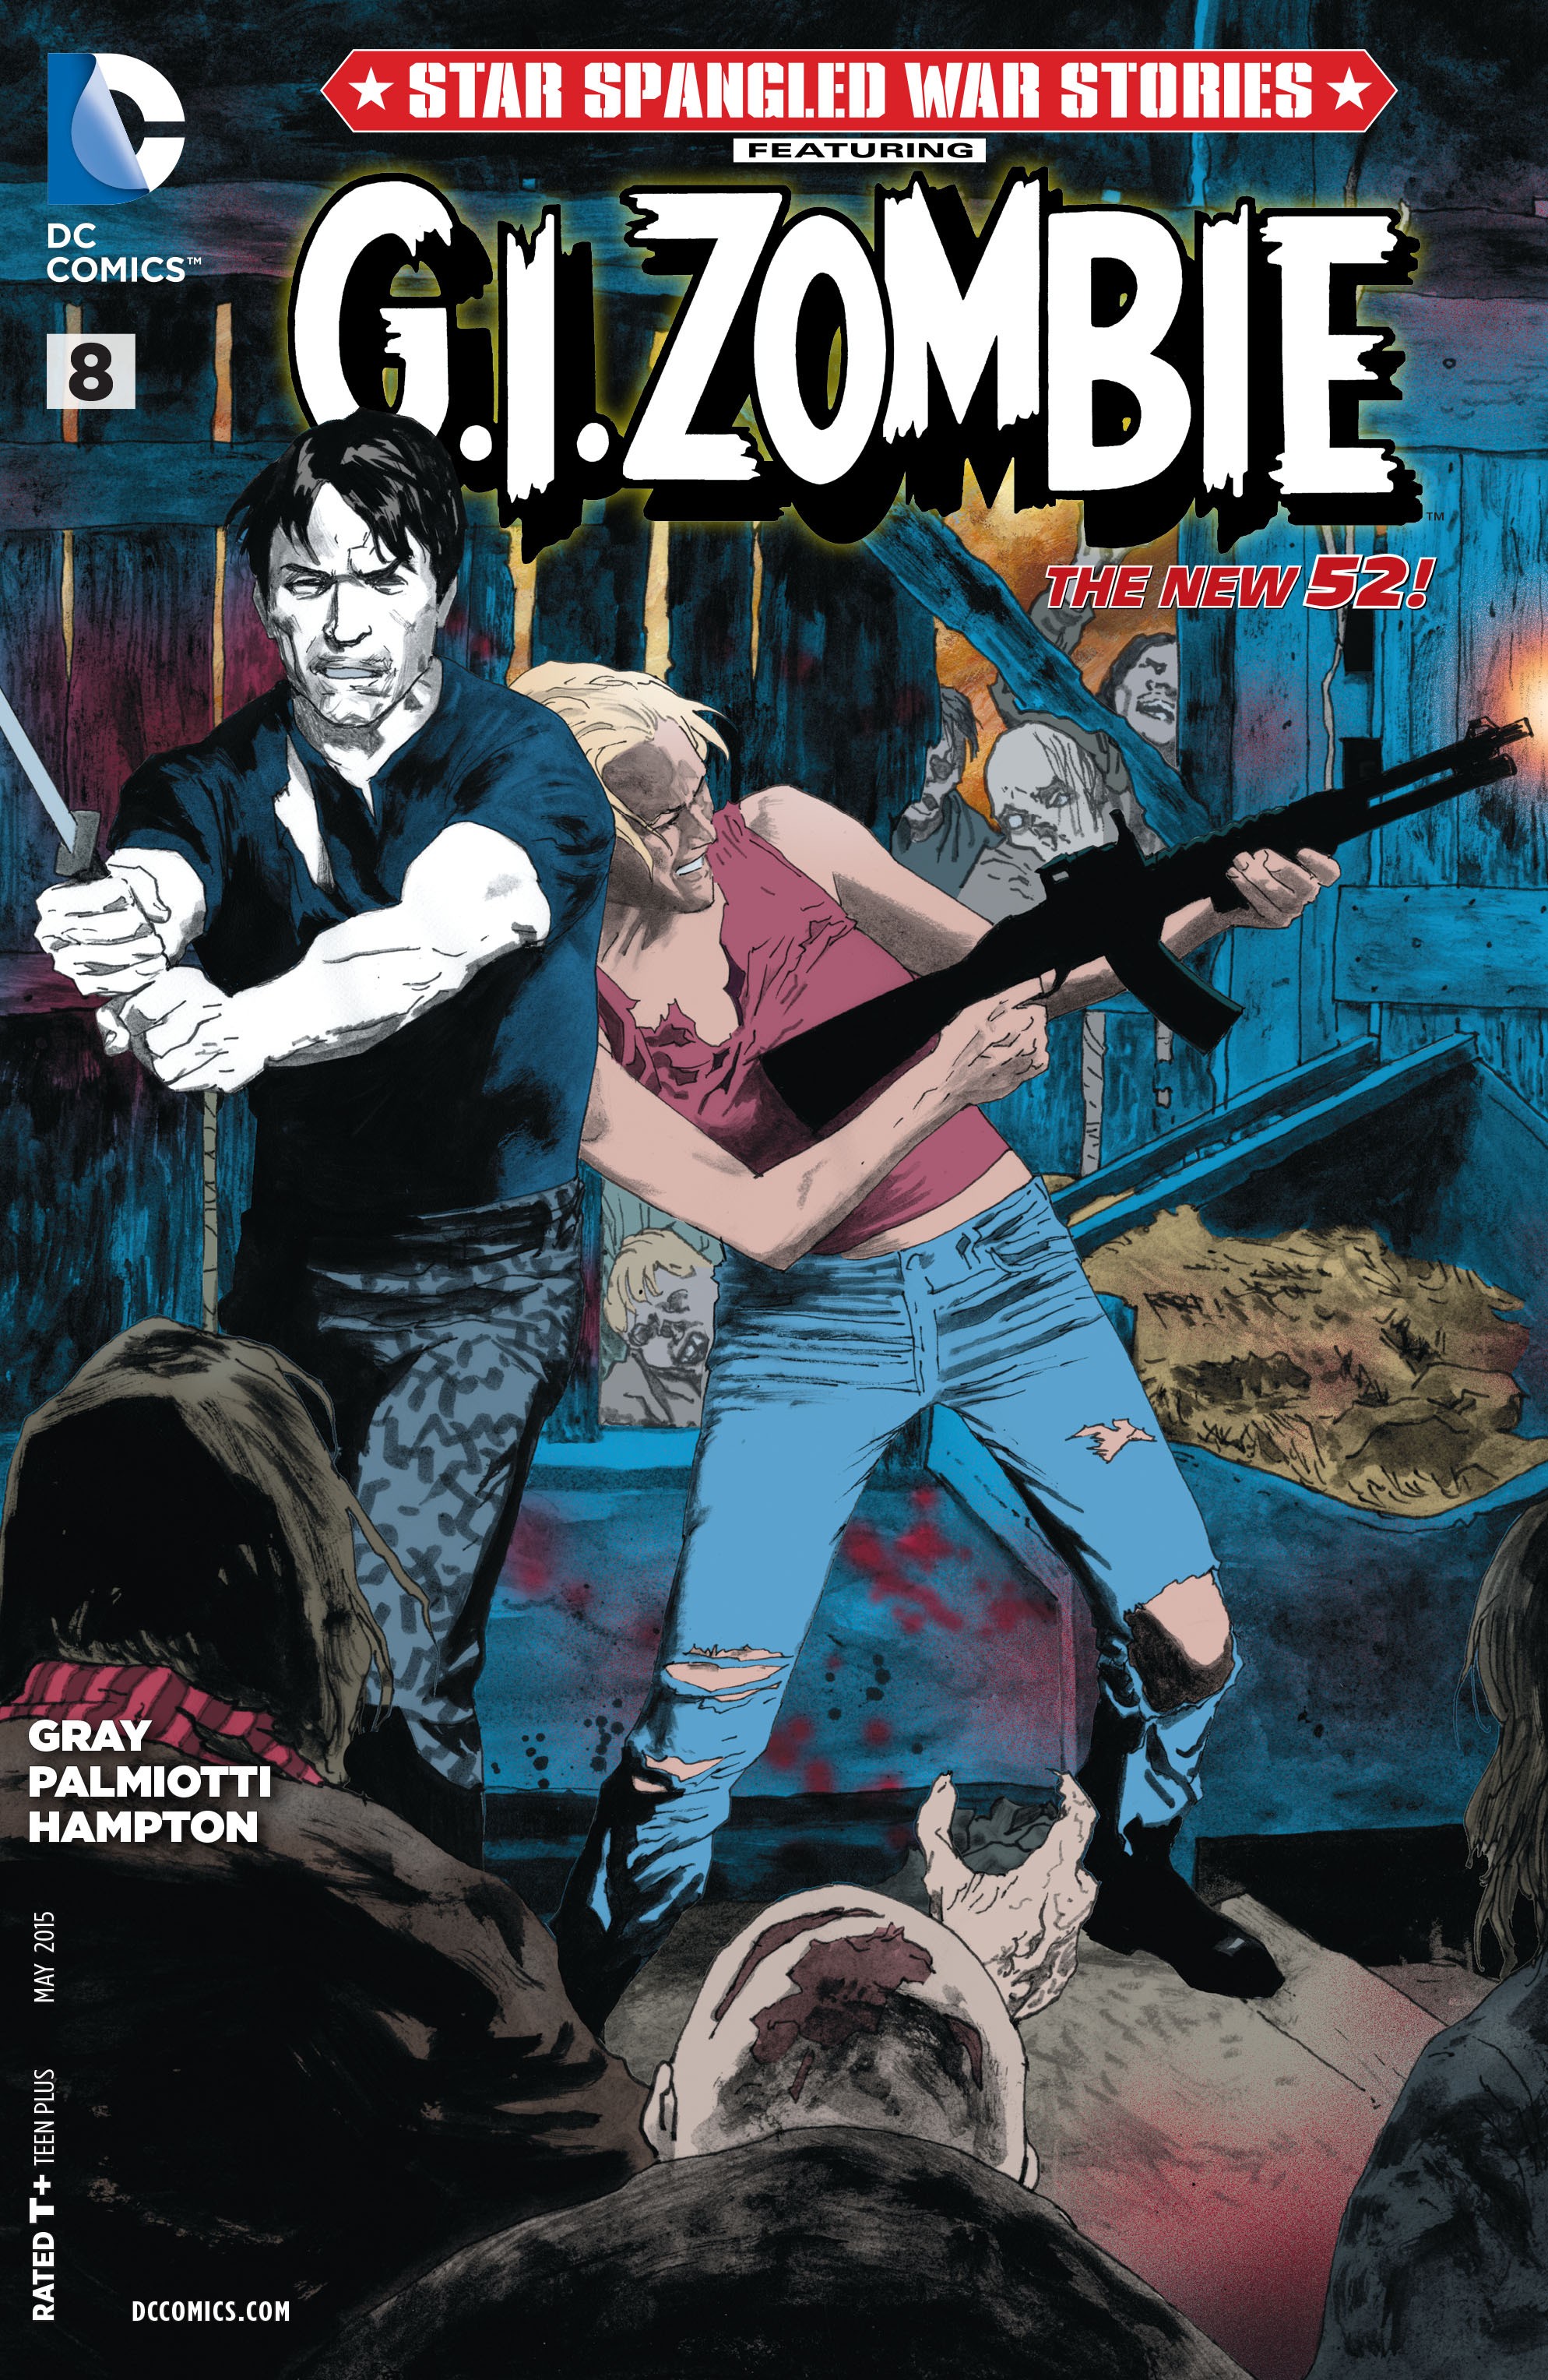 Star-Spangled War Stories Featuring G.I. Zombie Vol. 1 #8